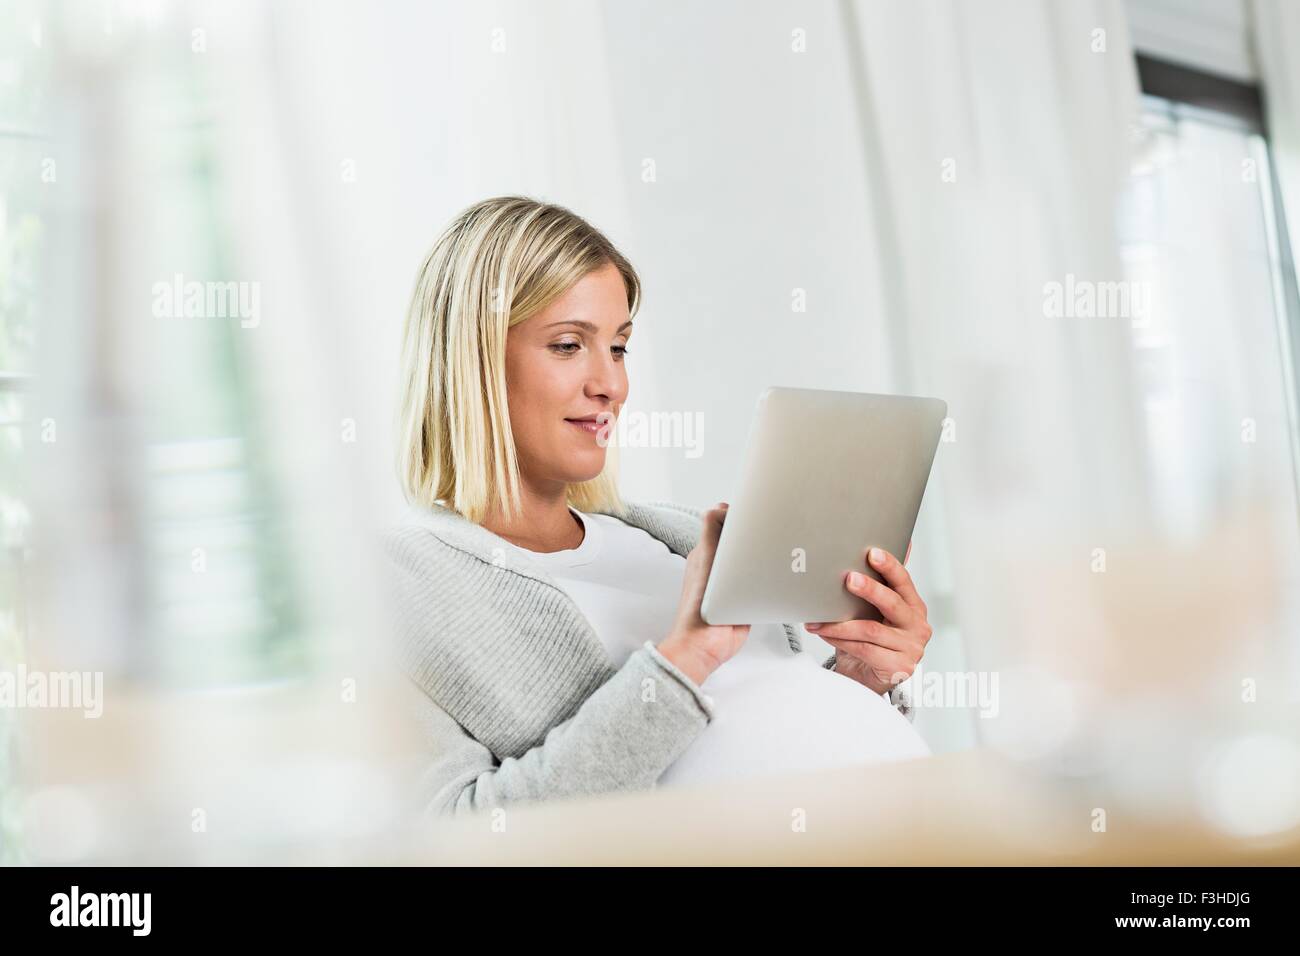 Full term pregnancy young woman using touchscreen on digital tablet Stock Photo